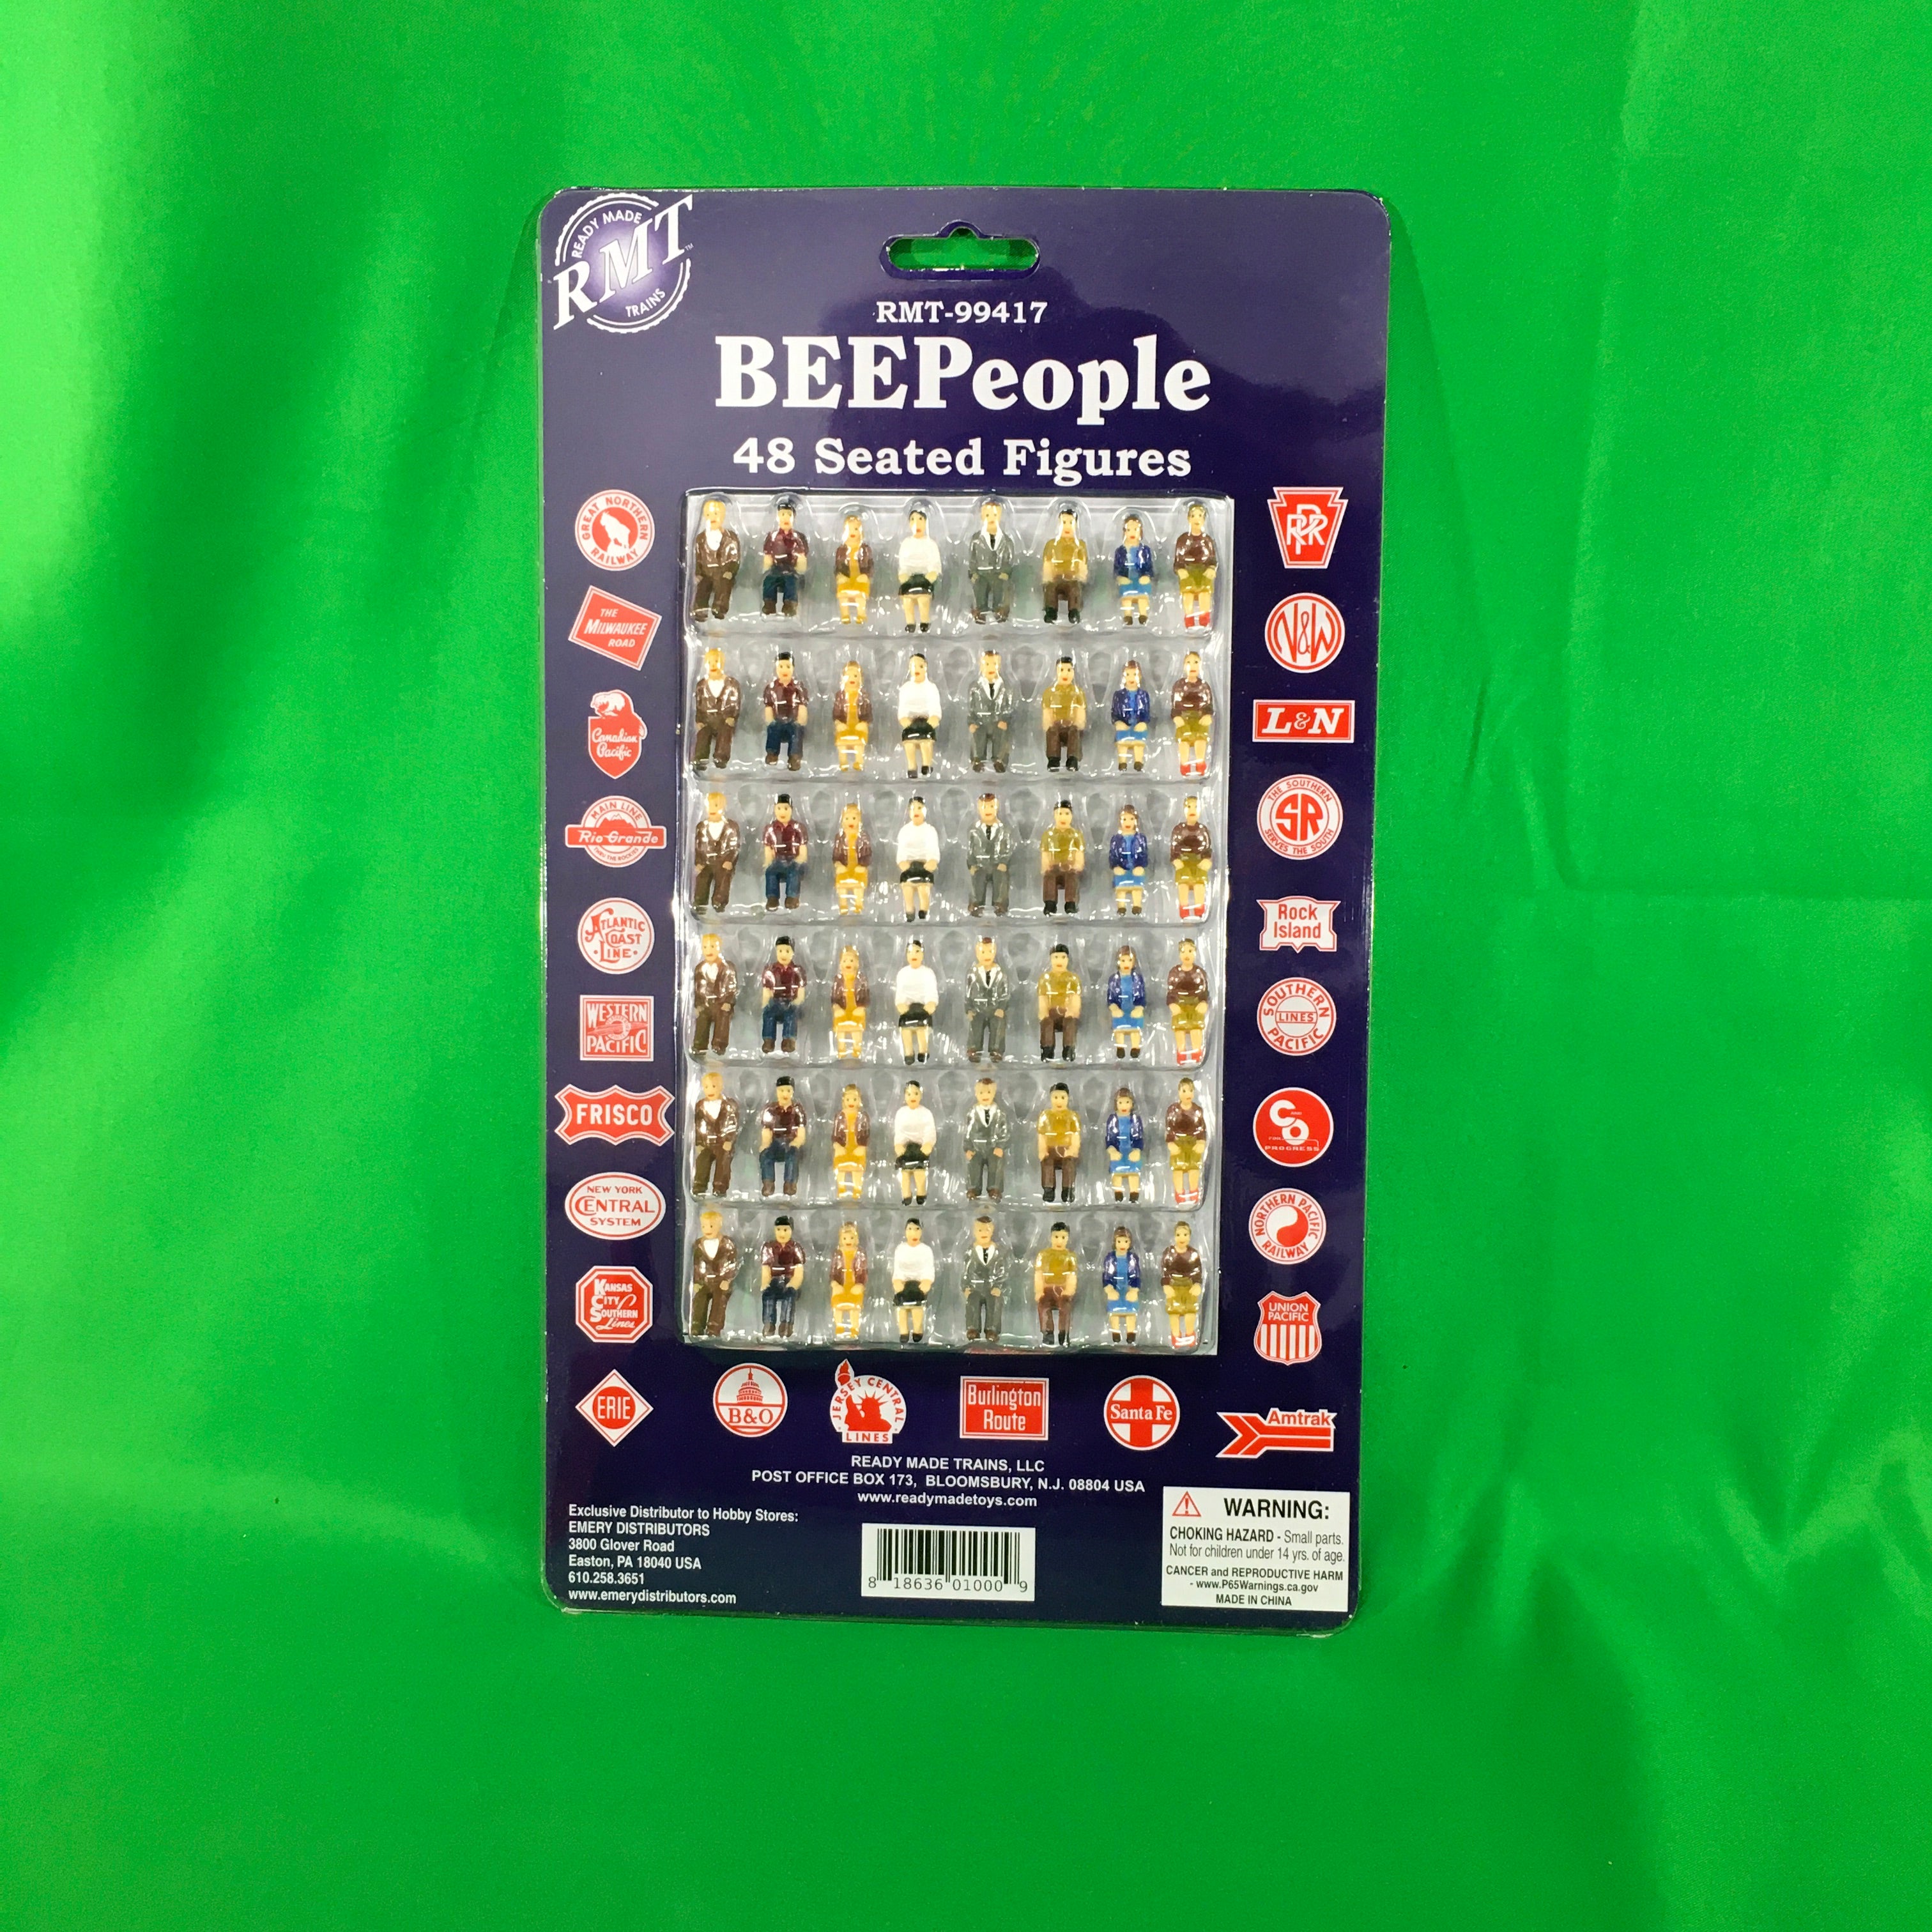 Ready Made Trains RMT-99417 - Seated Figures (48 Pack)